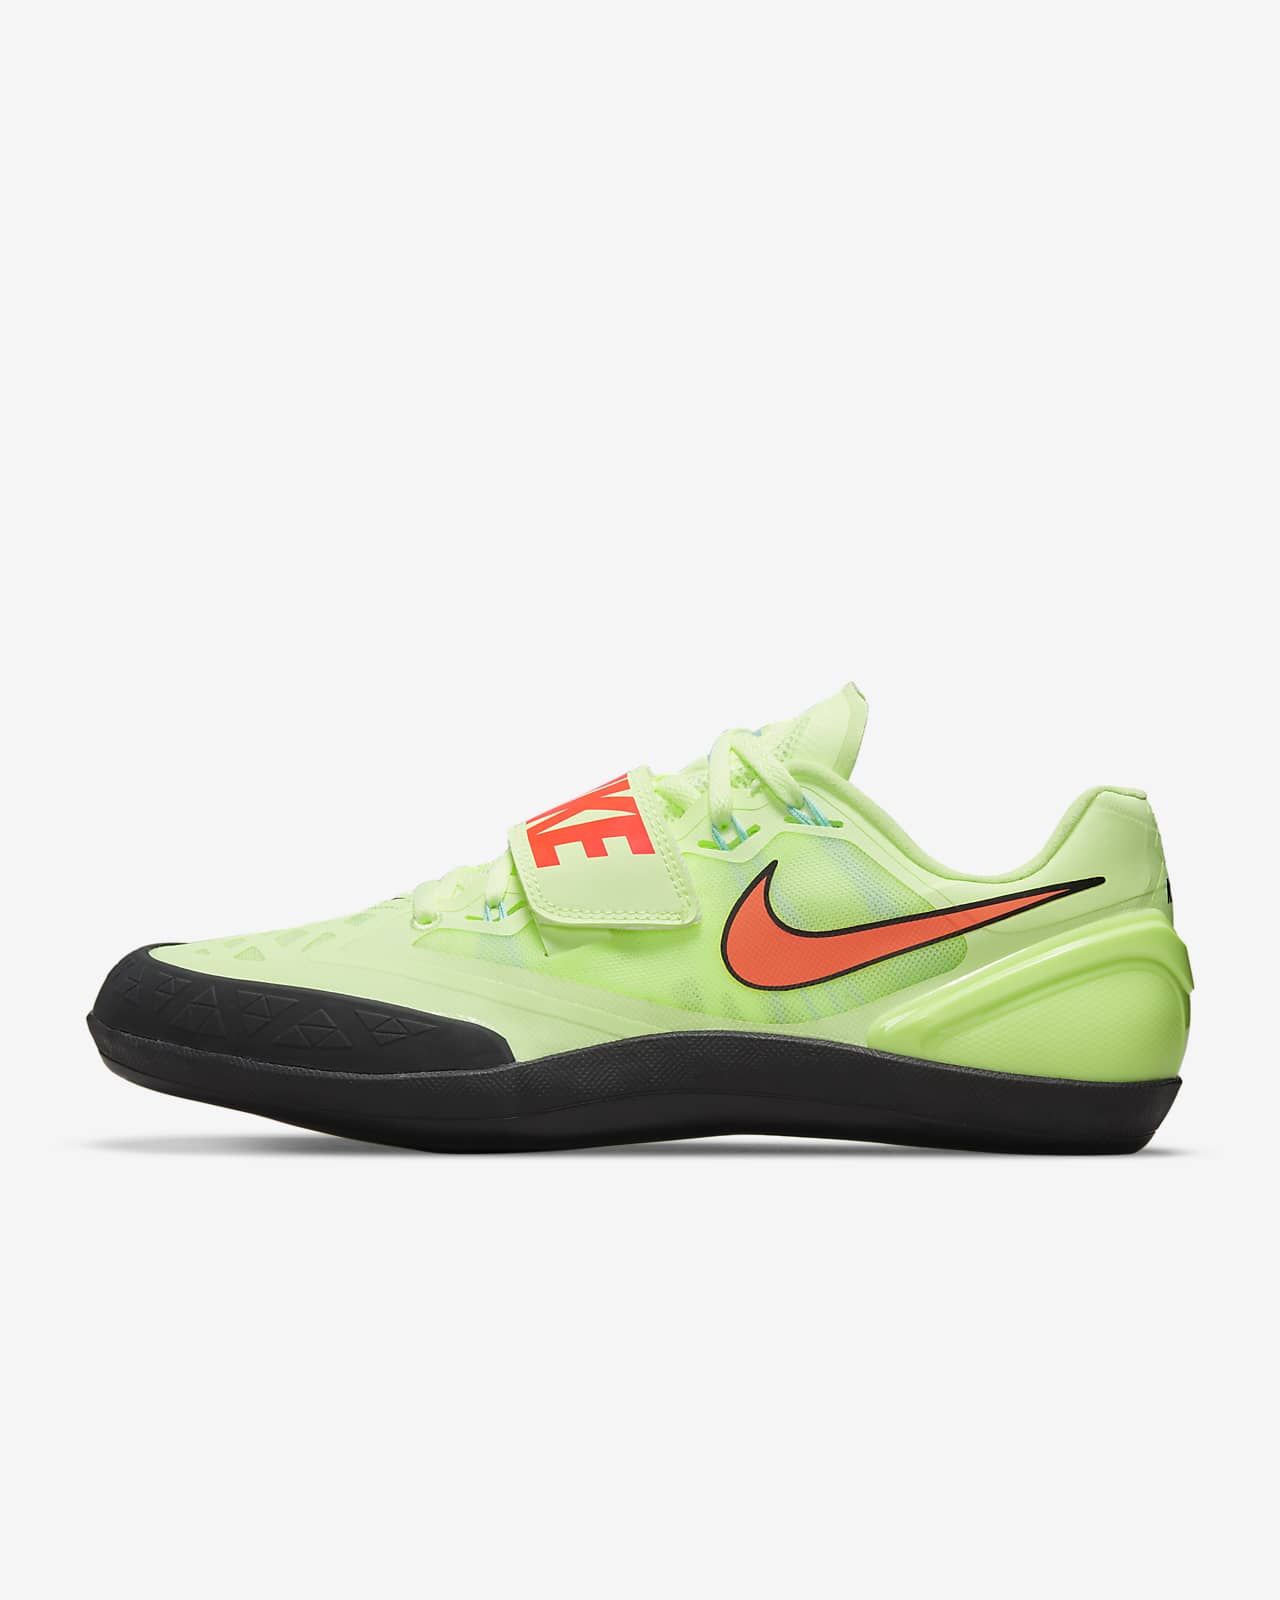 Nike Zoom Rotational 6 Track & Field Throwing Shoes